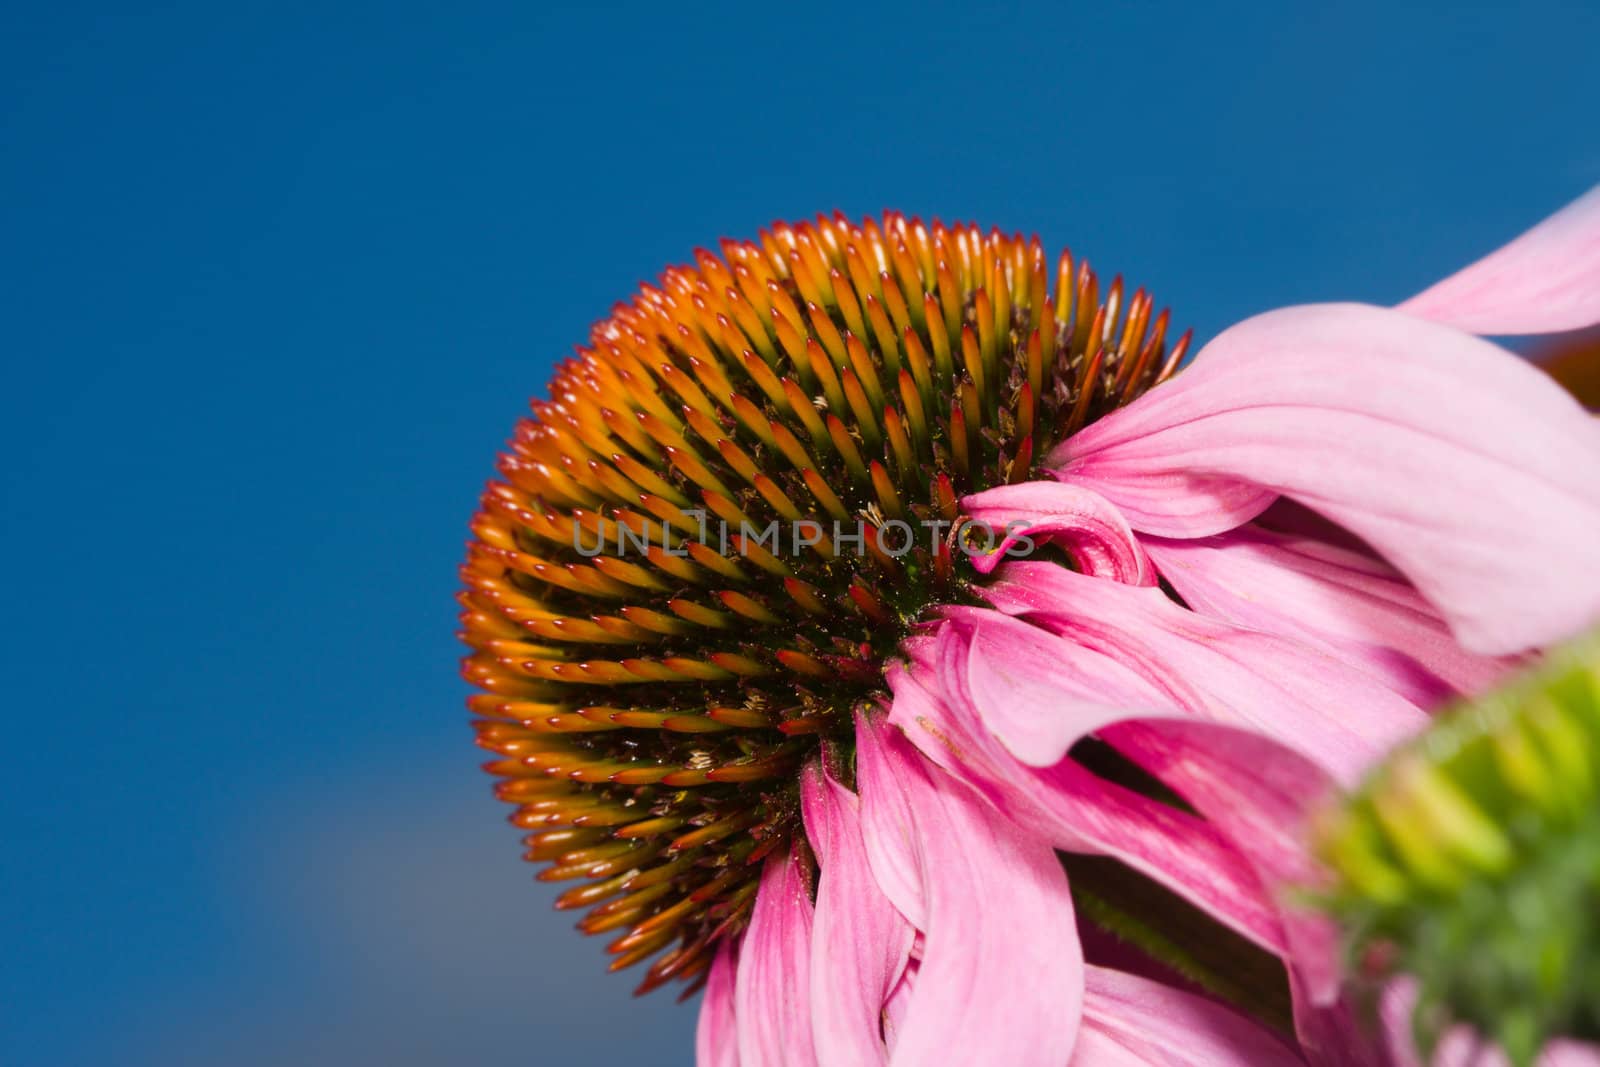 A Cone Flower in bloom against a blue sky.